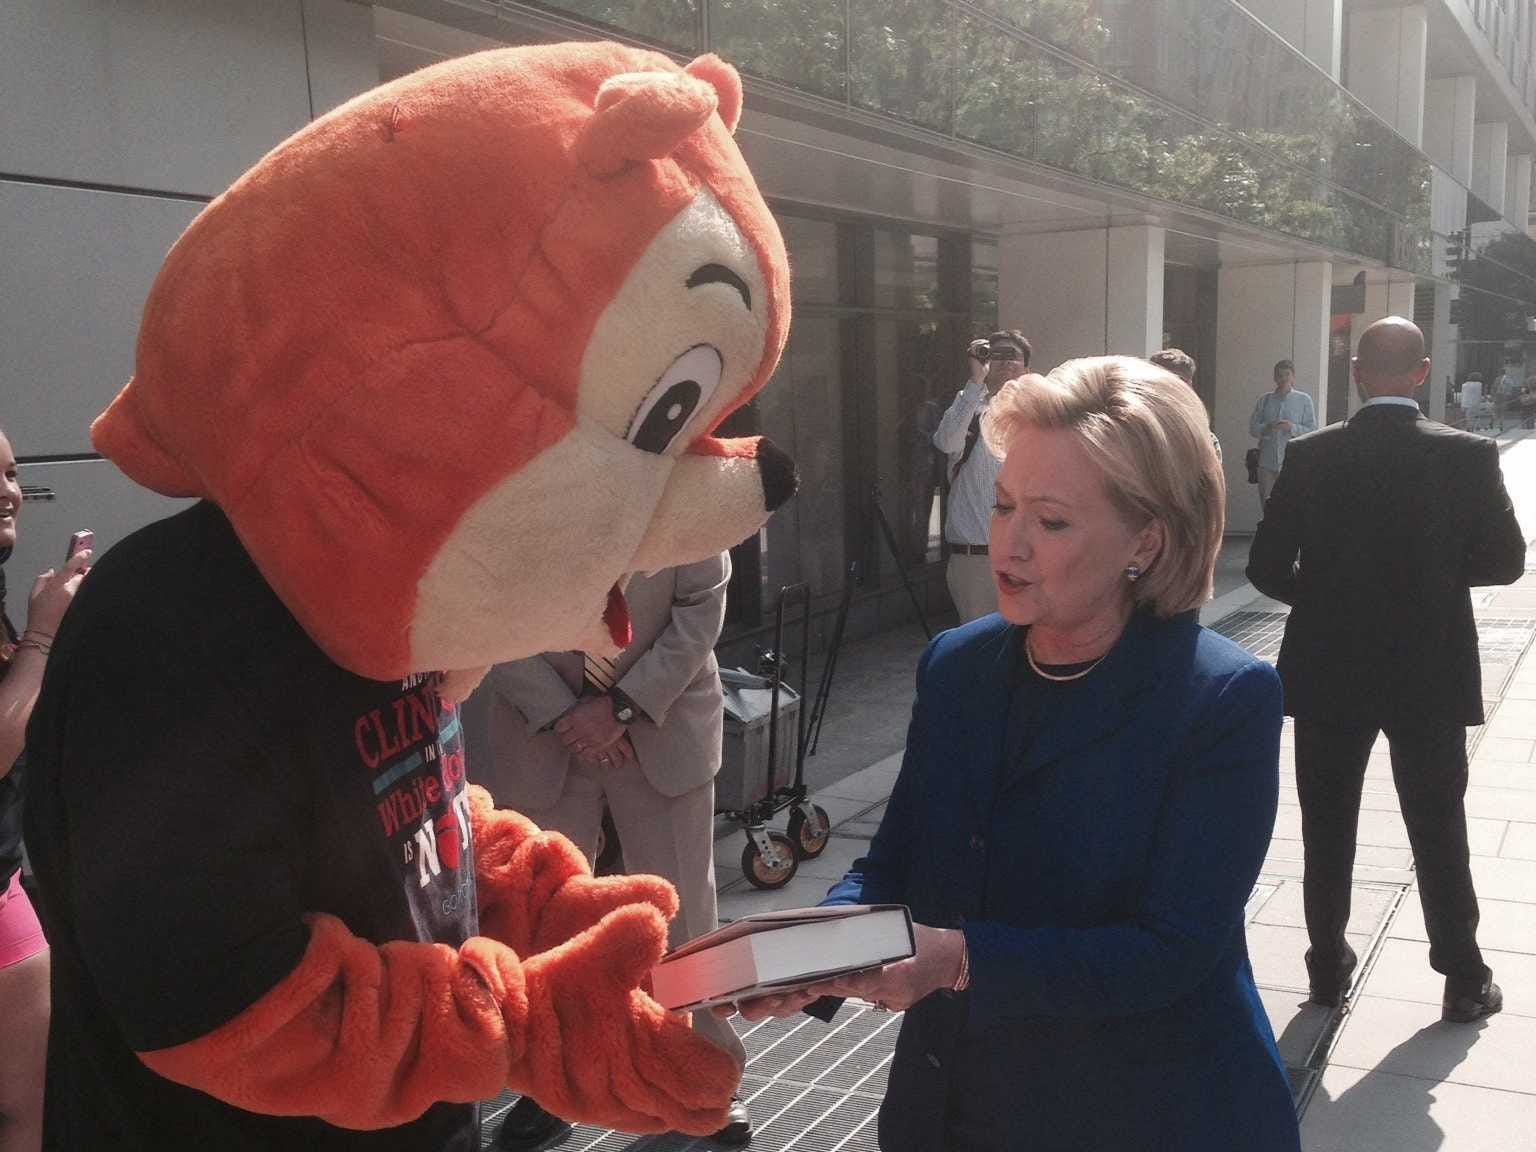 hillary-clinton-had-the-perfect-response-for-the-republican-squirrel-thats-been-stalking-her.jpg